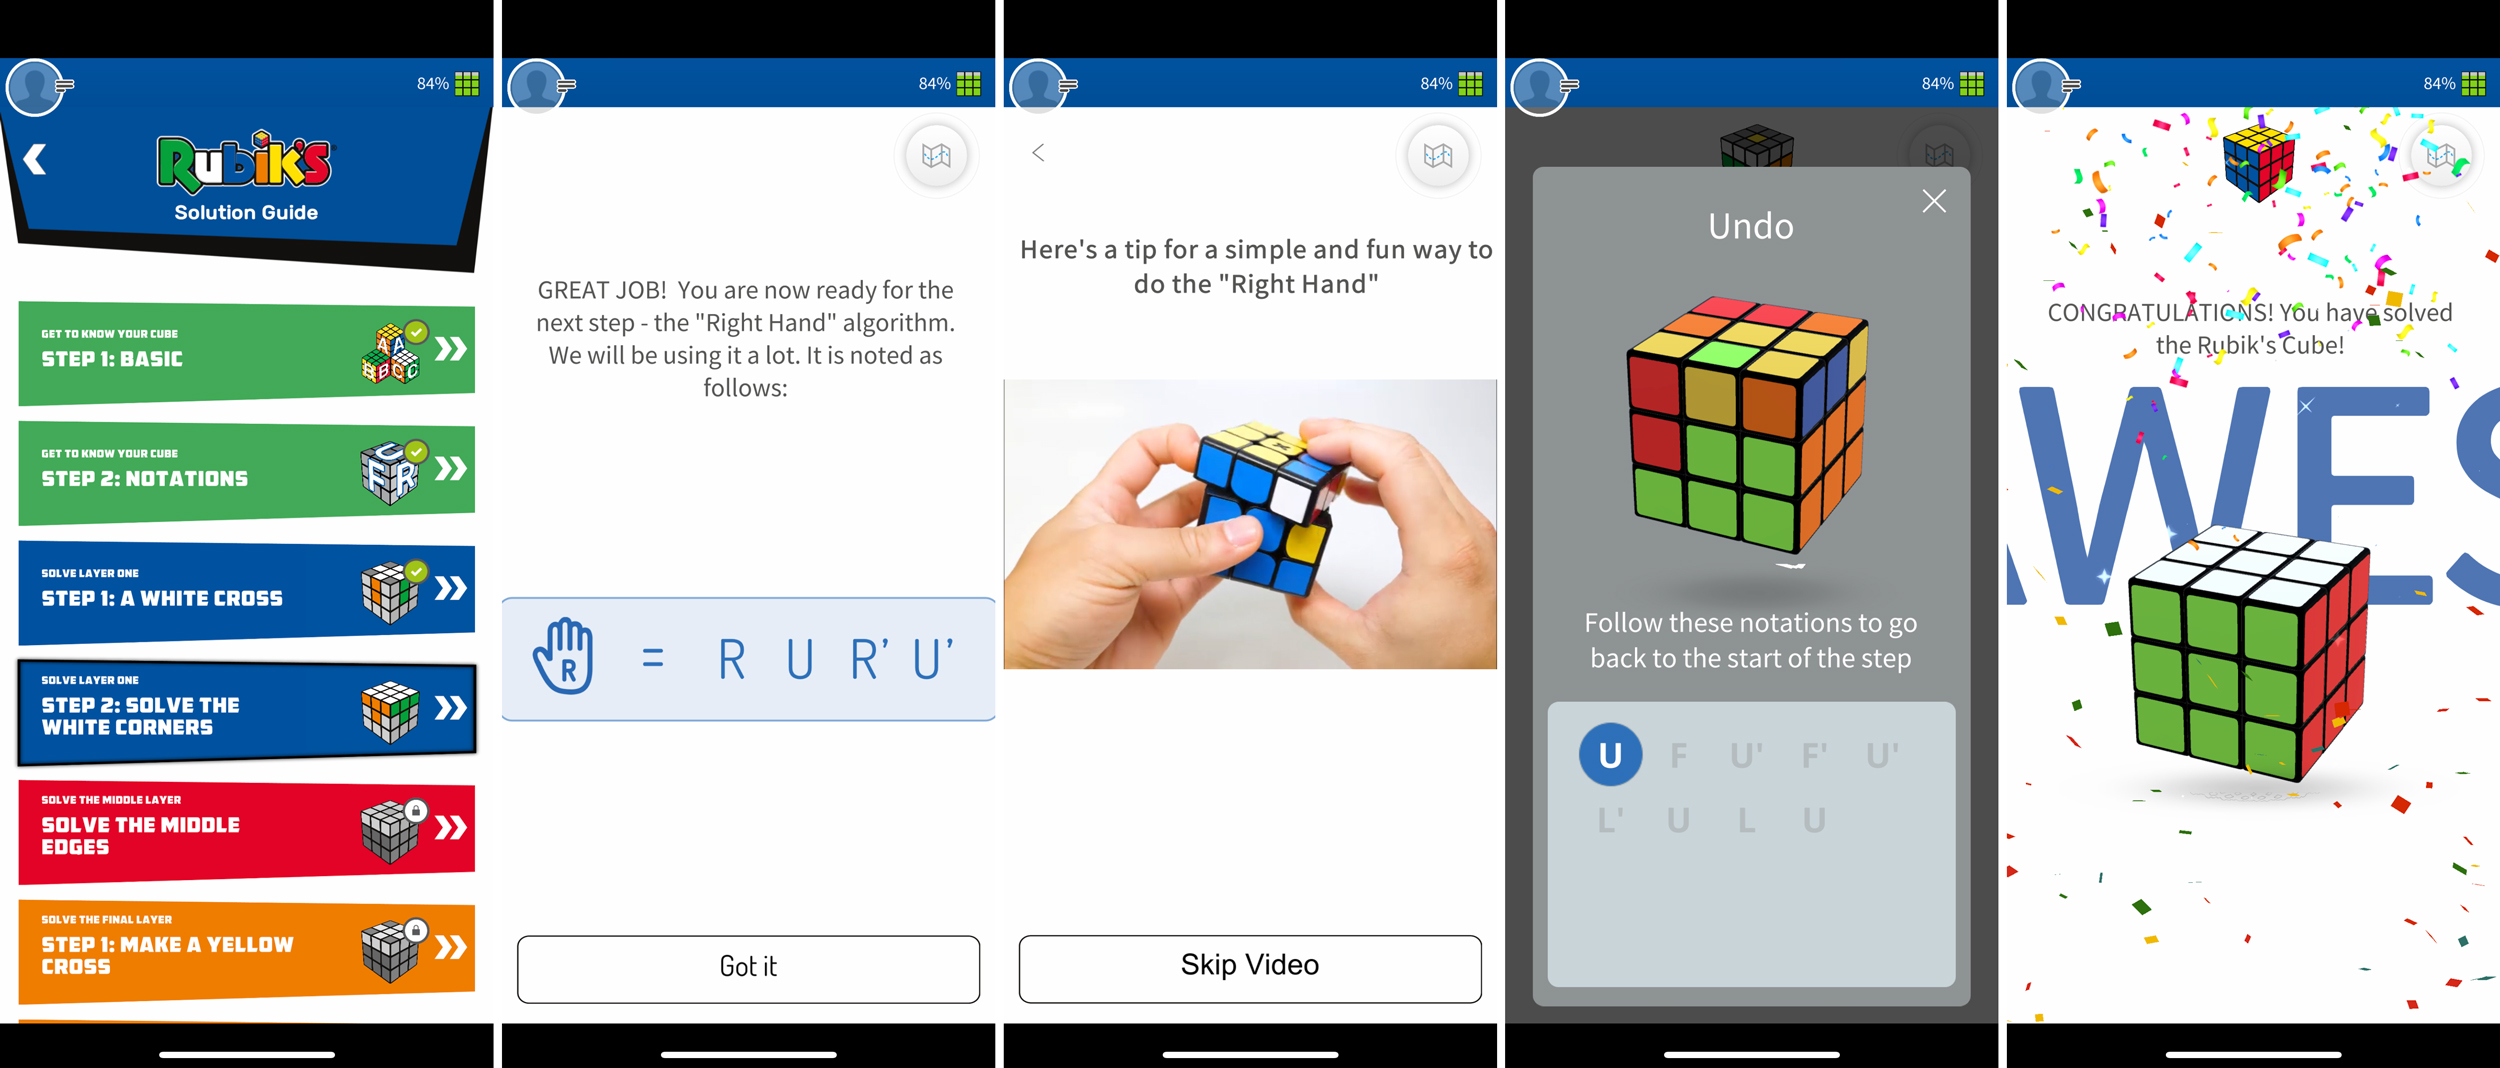 Learning and mastering the specific steps needed to quickly solve the puzzle is made very easy with the app's use of text instructions, 3D animations, and even videos showing ideal handling techniques. (Screenshot: Andrew Liszewski/Gizmodo)